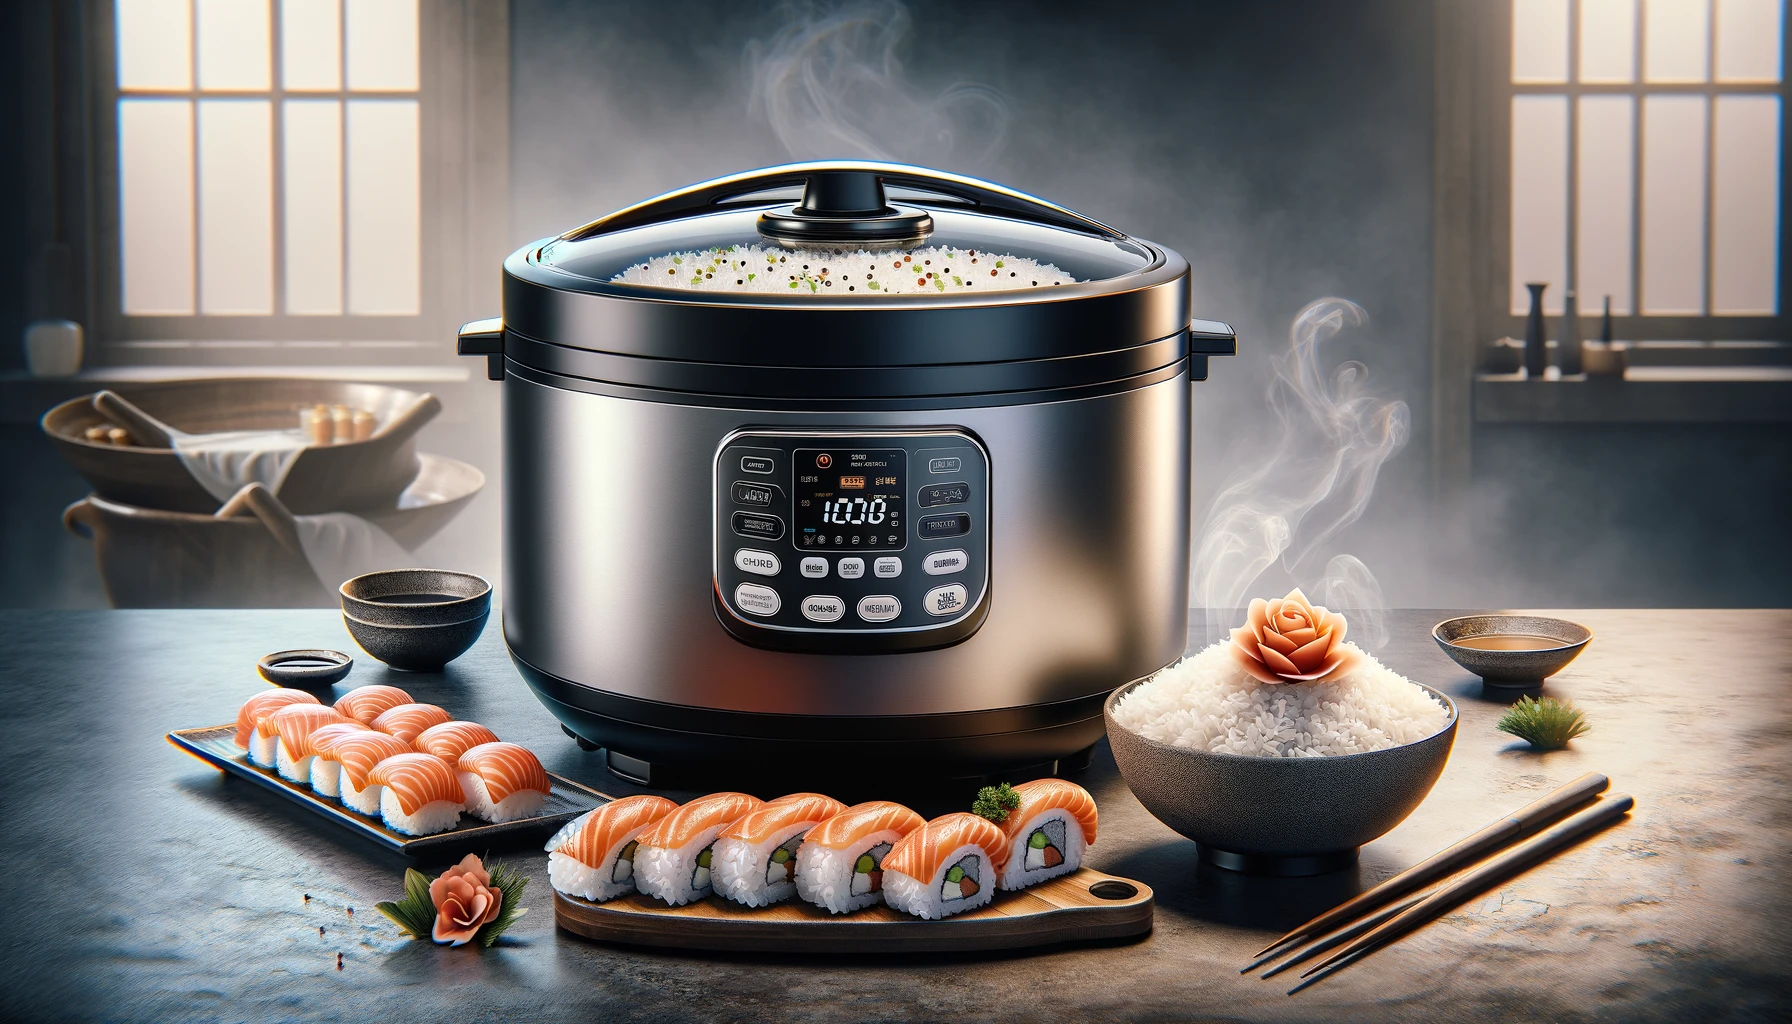 best sushi rice cooker